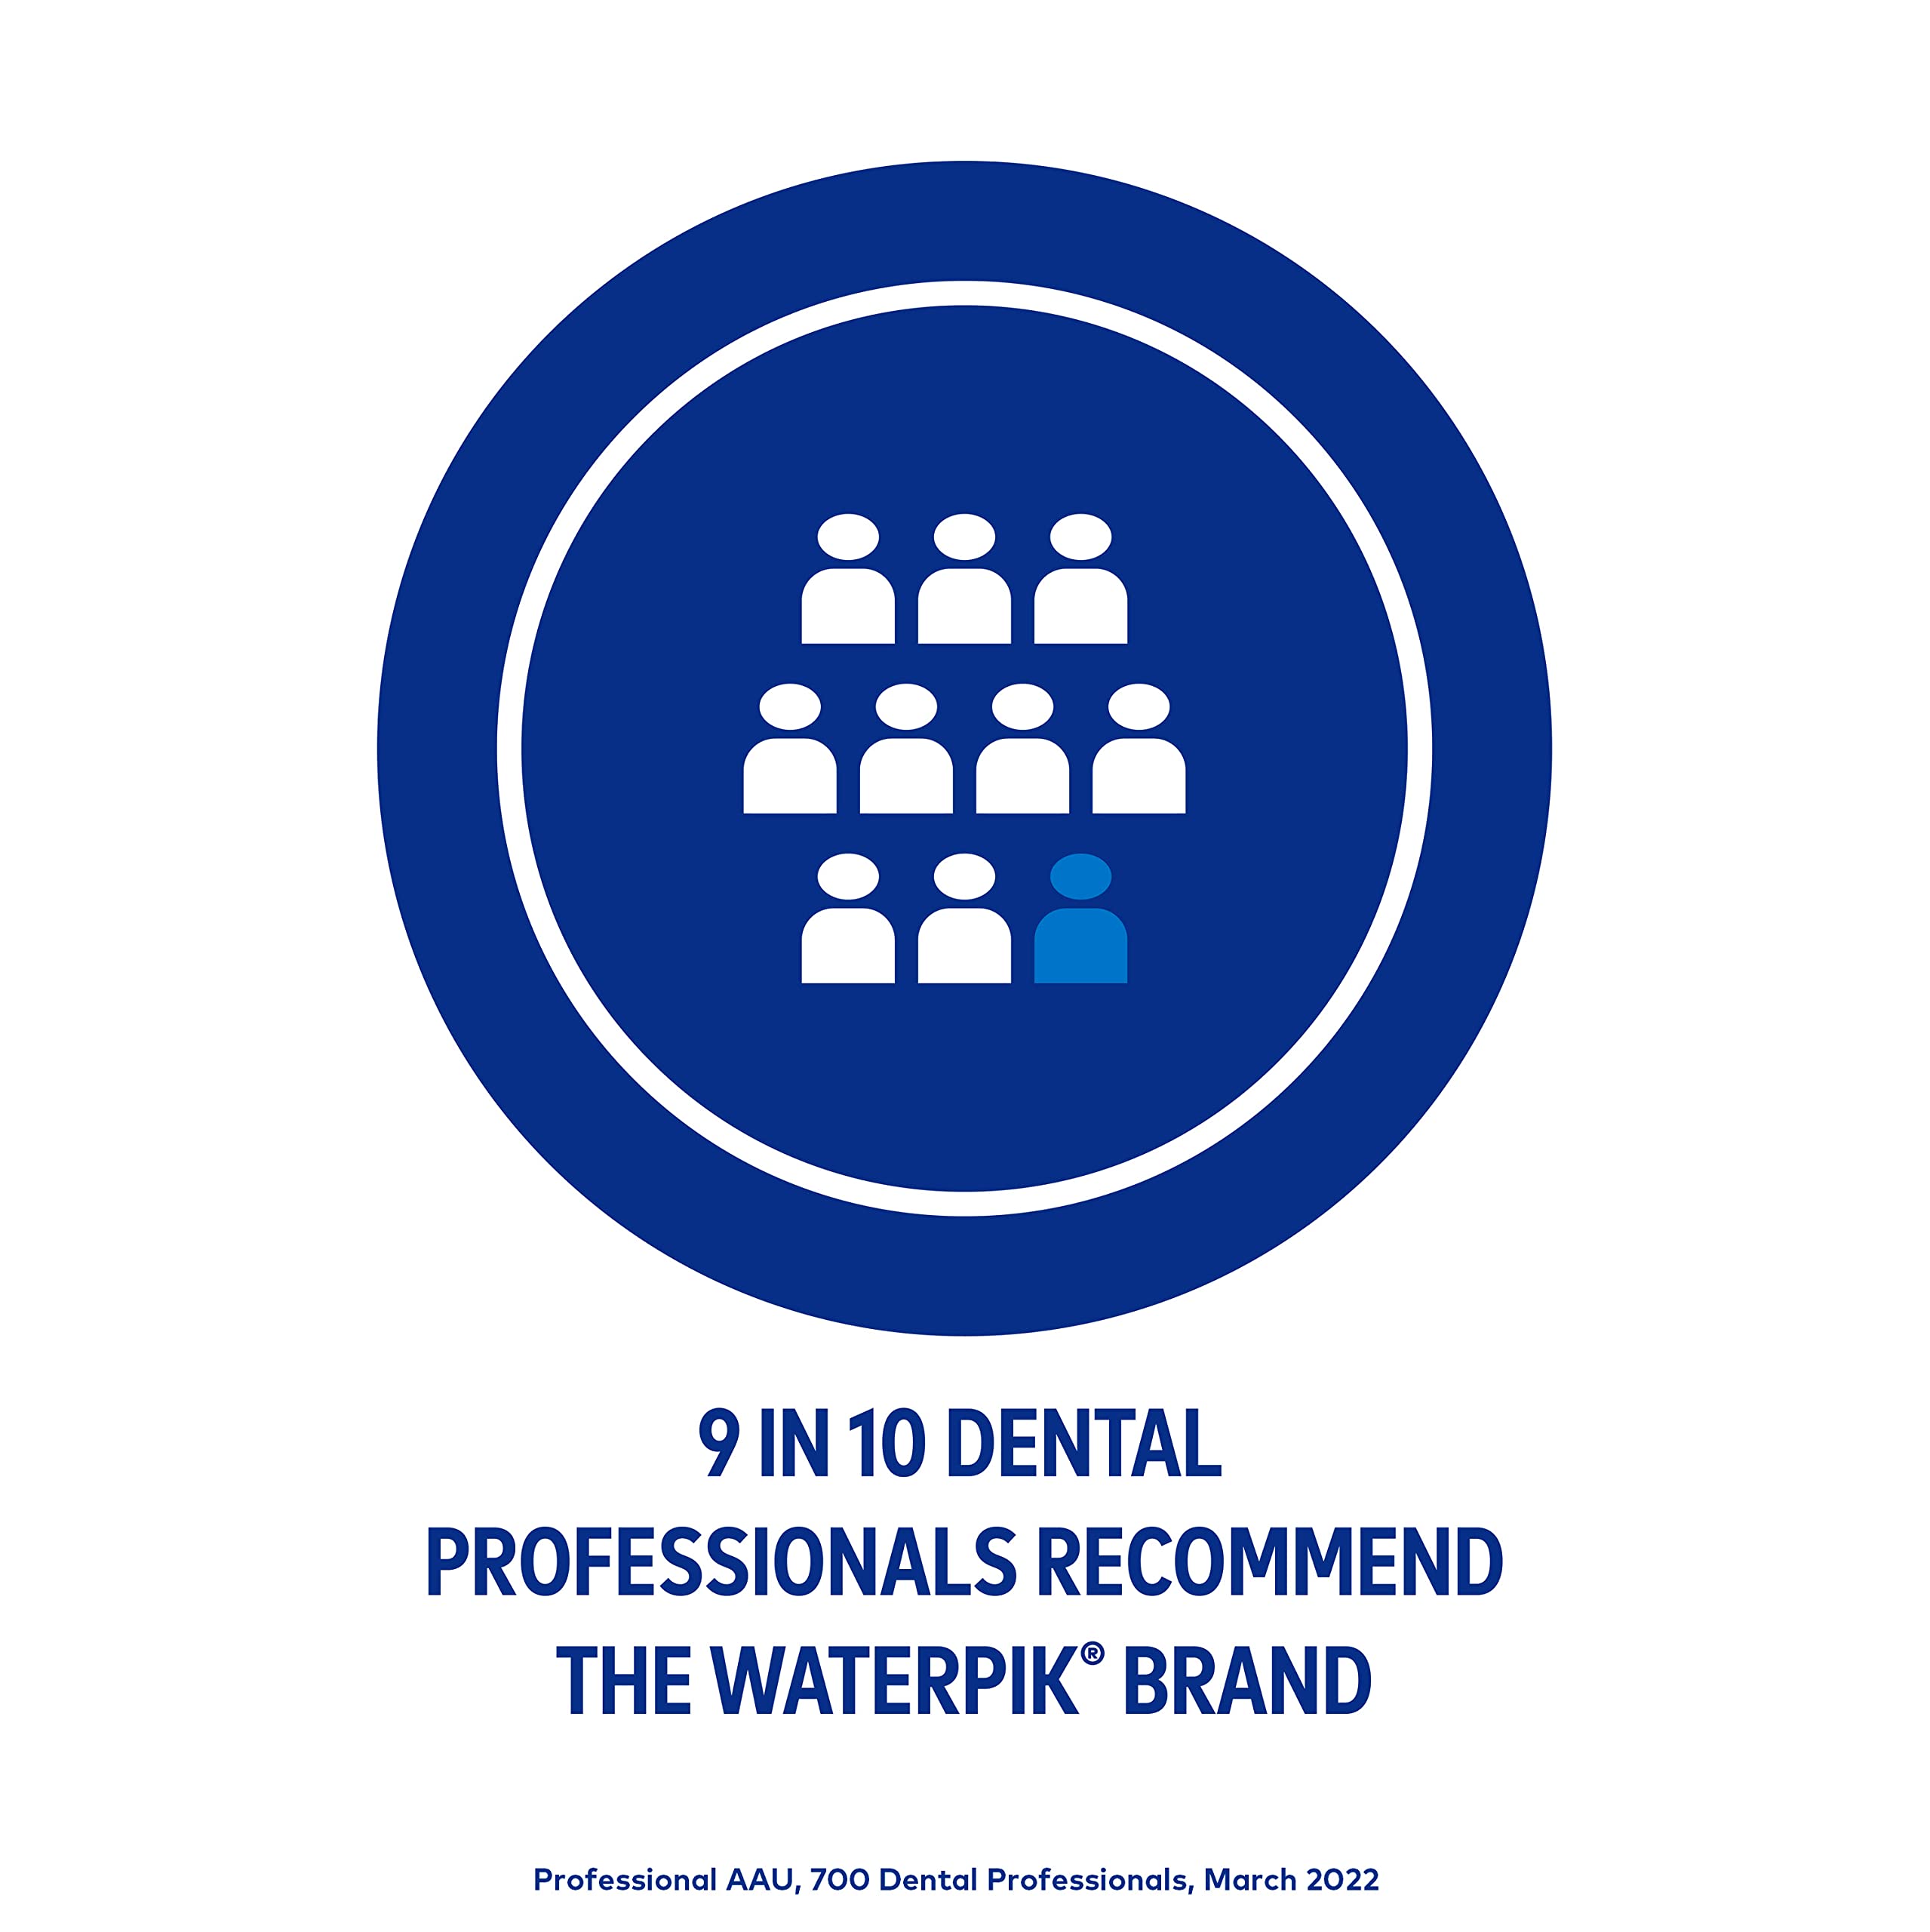 Waterpik Cordless Advanced Water Flosser For Teeth, Gums, Braces, Dental Care With Travel Bag and 4 Tips, ADA Accepted, Rechargeable, Portable, and Waterproof, Gray WP-587